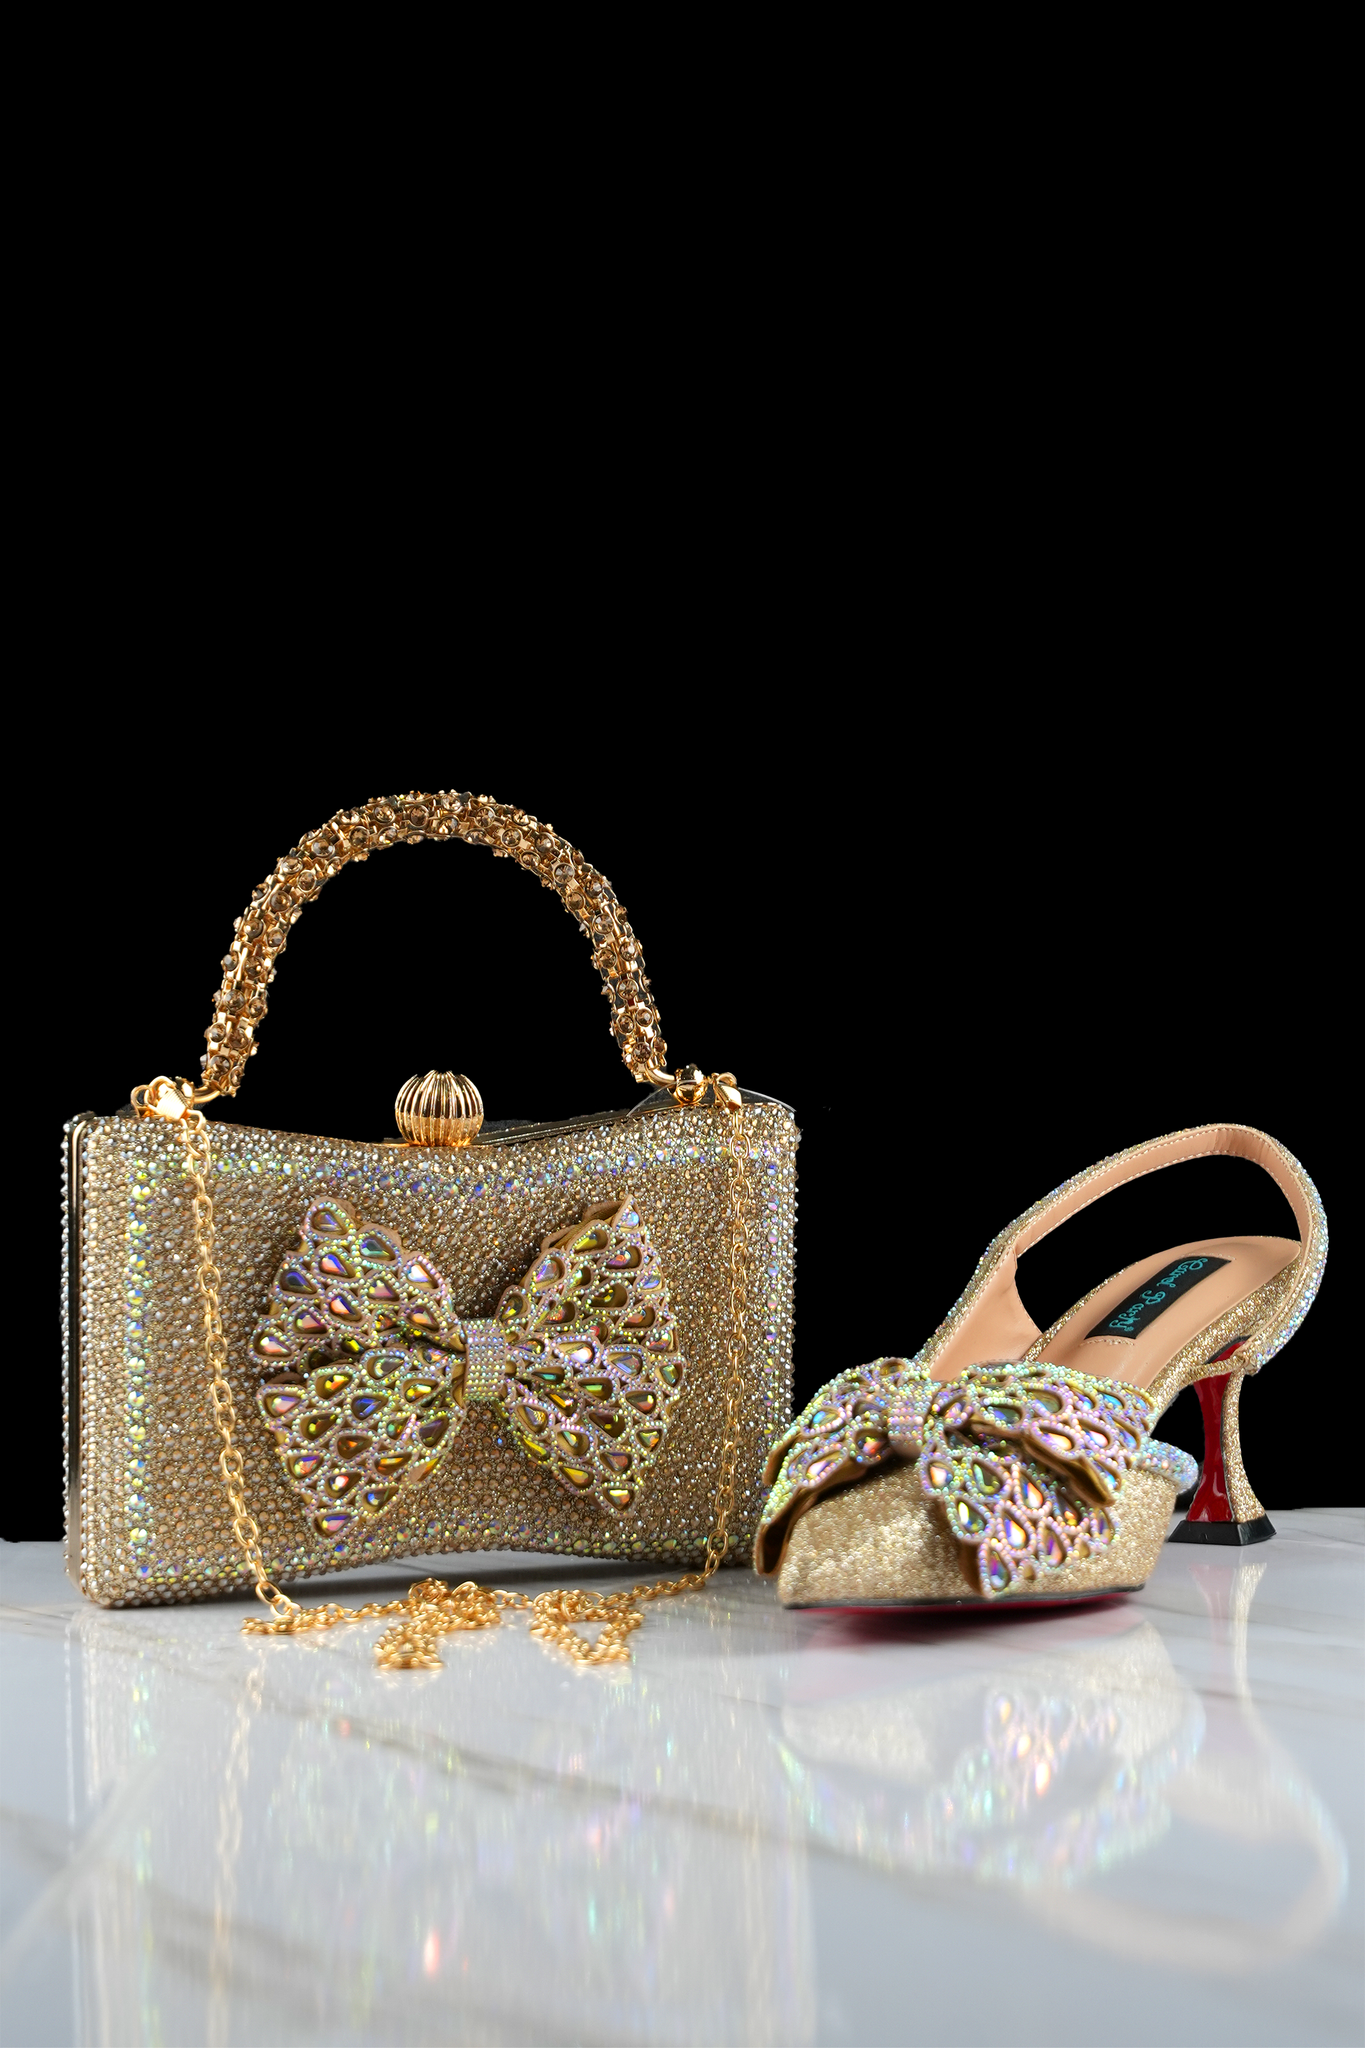 Fashion Pointed Heels Italian Bag and Shoe Set - Gold